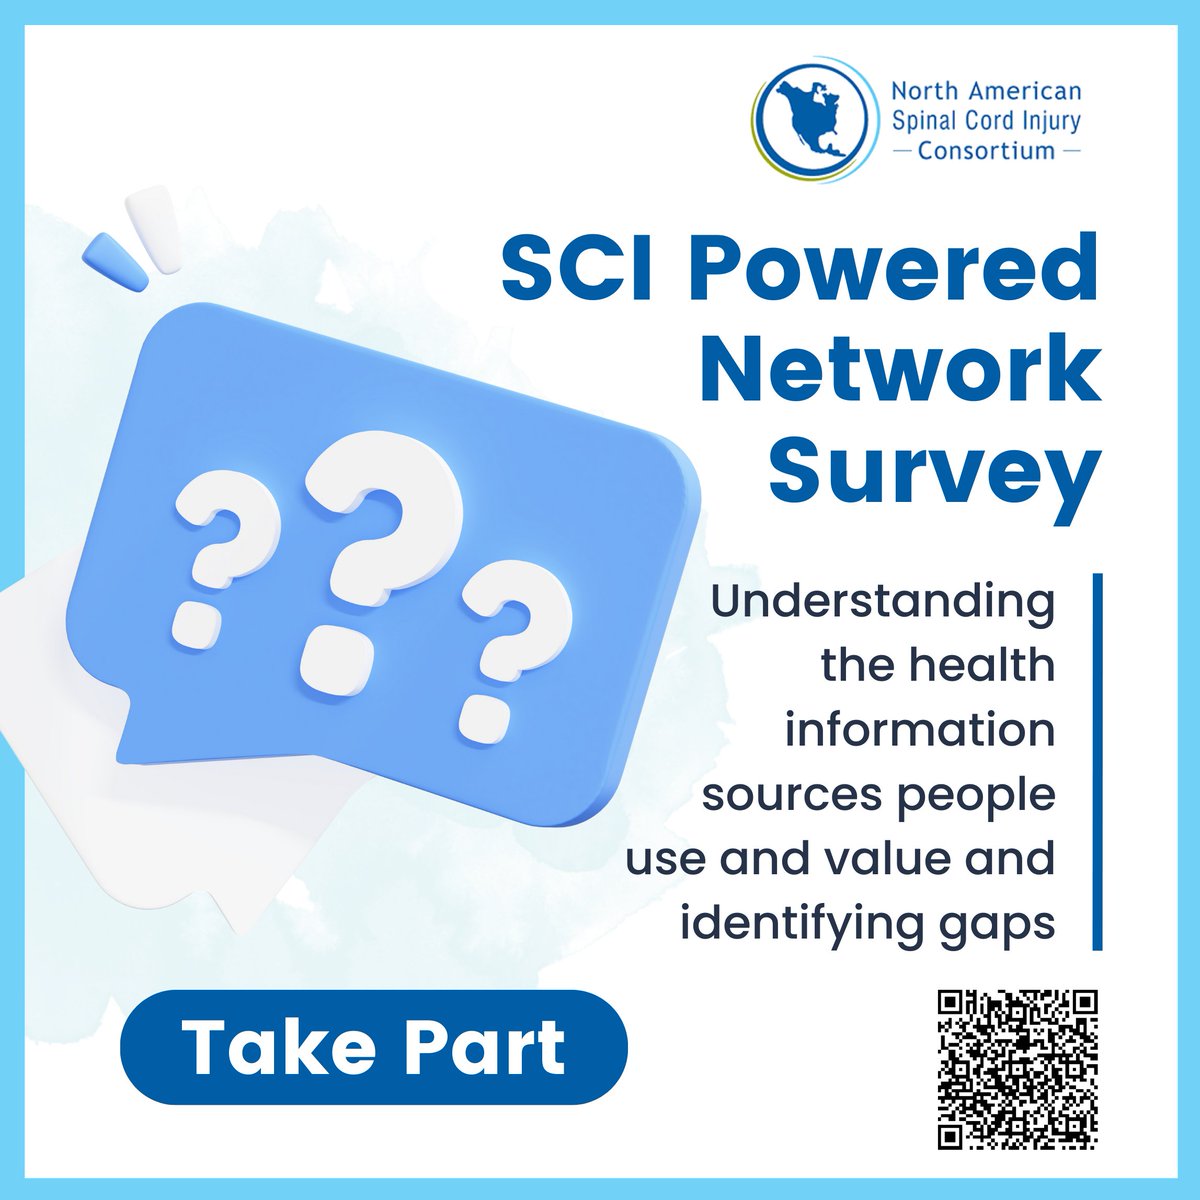 If you haven’t yet taken part in the SCI Powered Network Survey on health information and sources, please consider taking a few minutes to weigh in on this important topic. The survey takes less than 20 minutes to complete. surveymonkey.com/r/SCINeedsInfo…